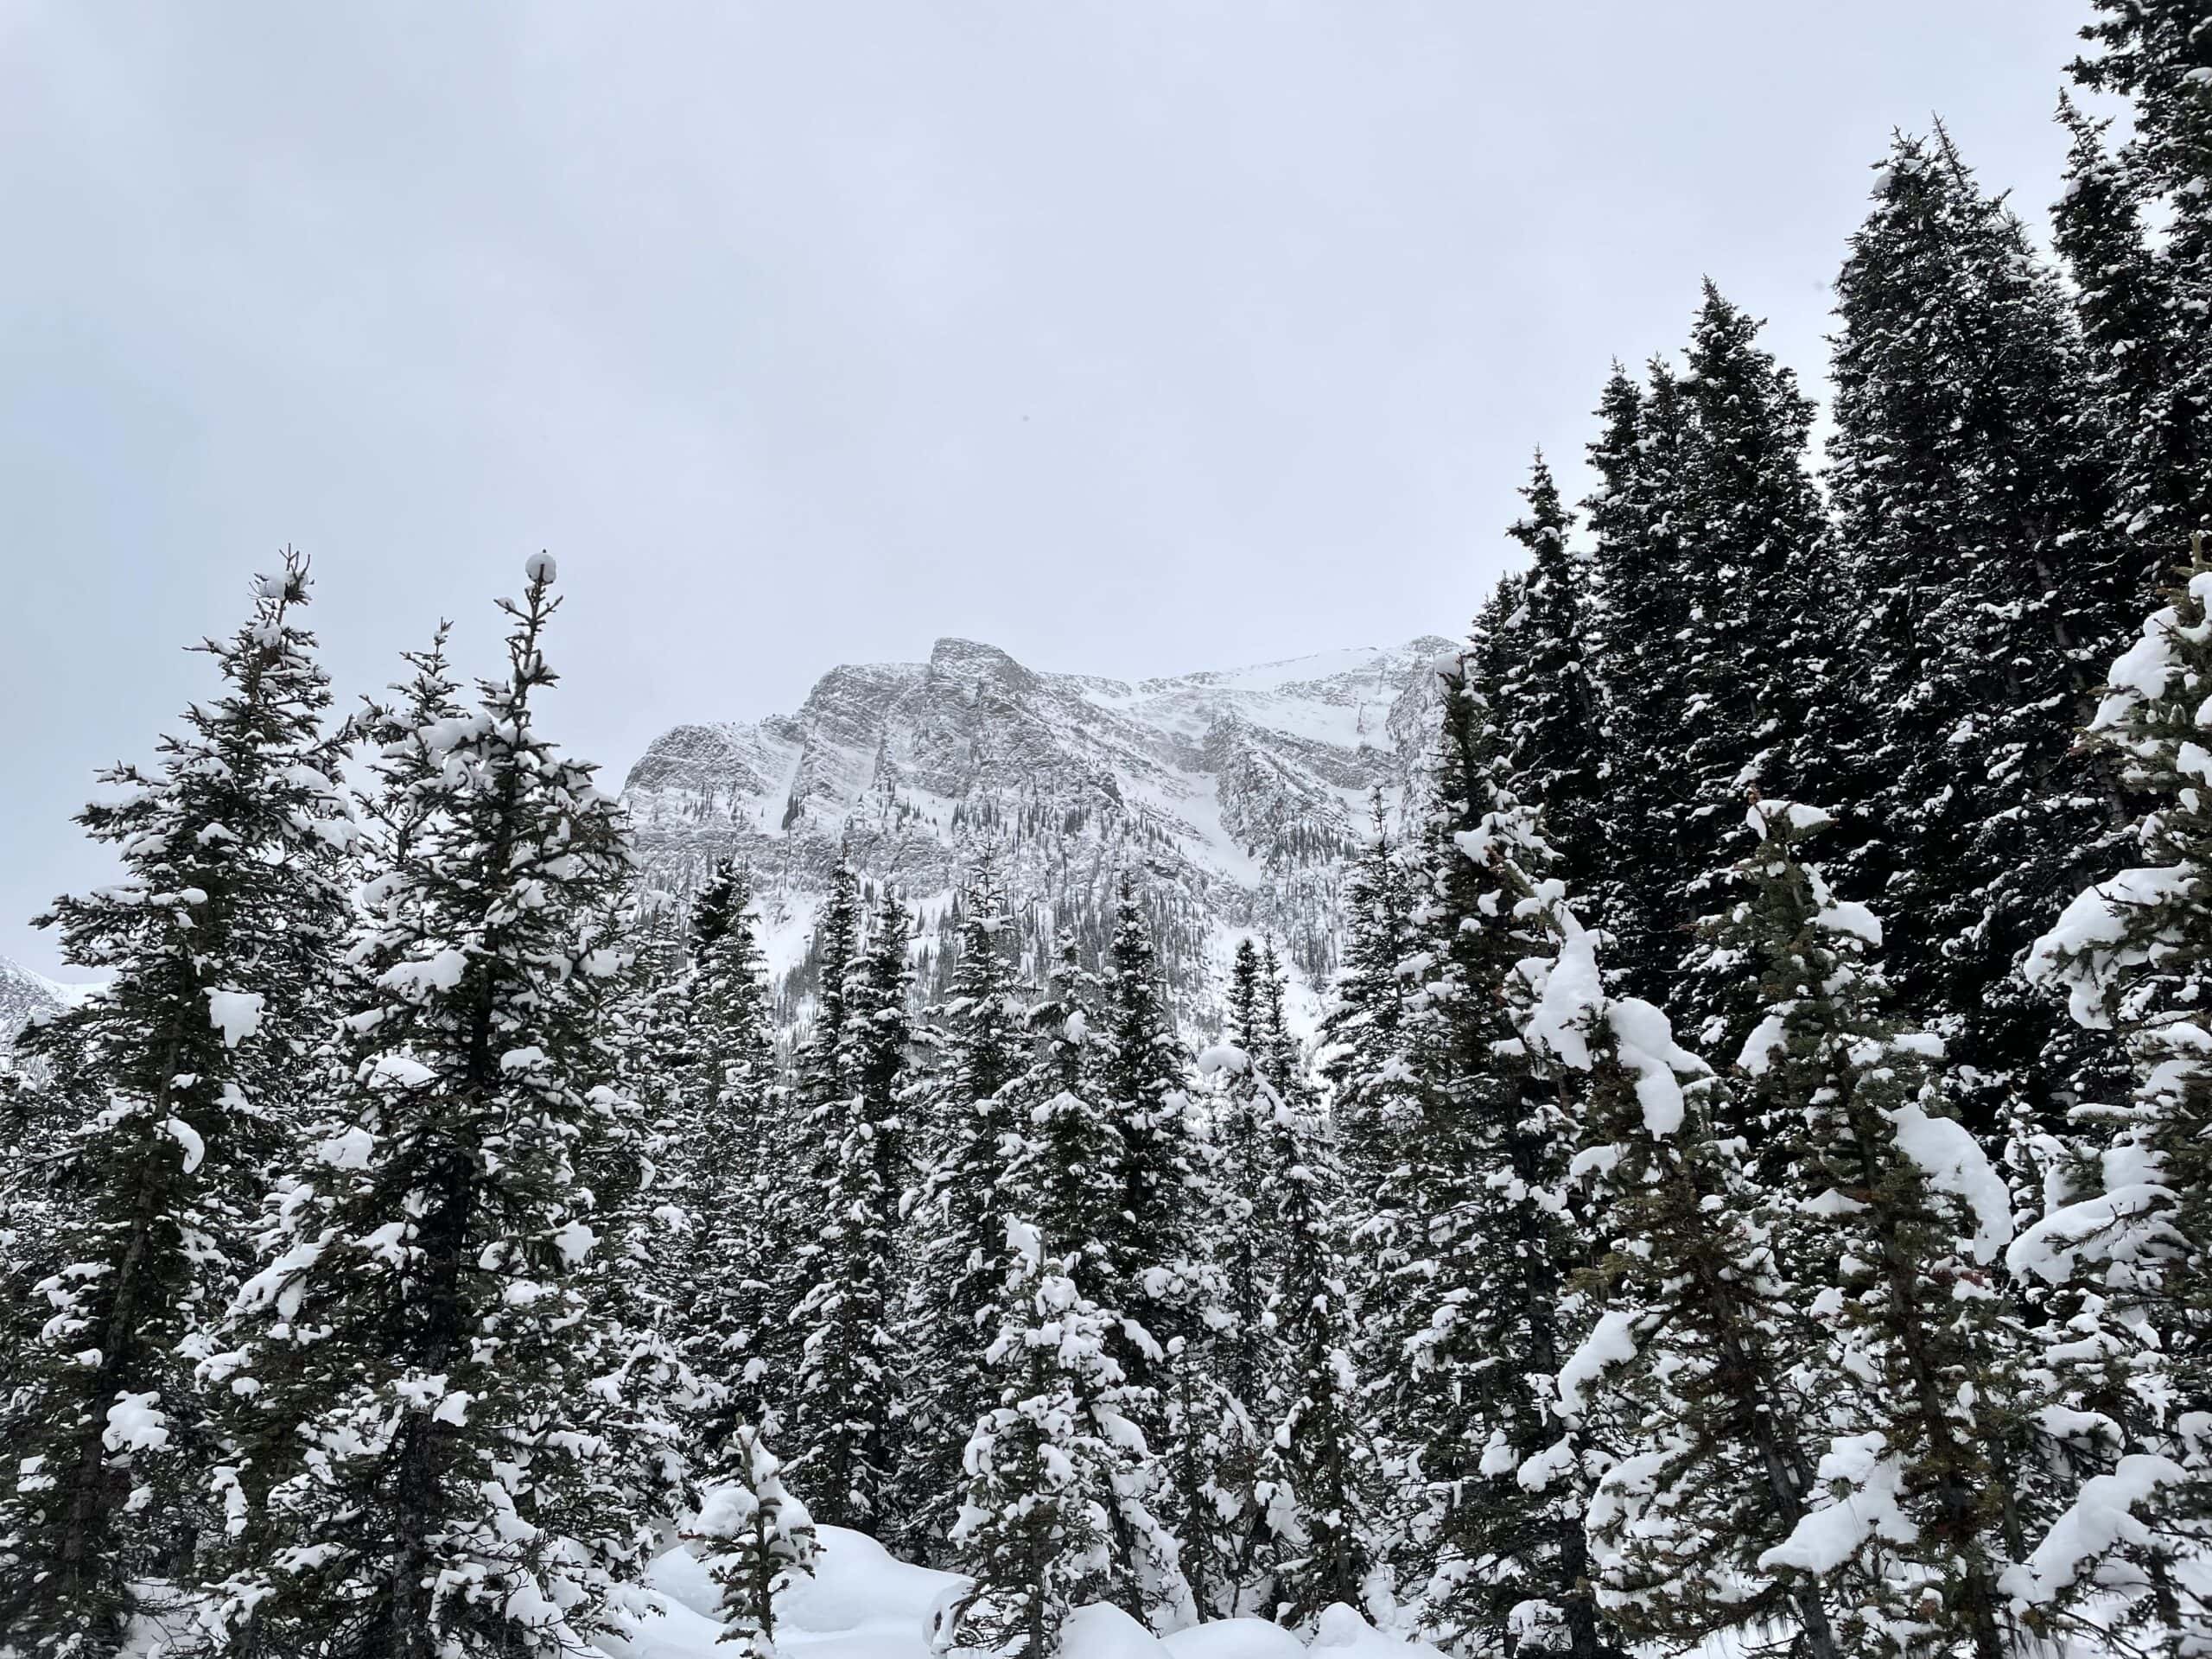 The snowy trails of Banff National Park are a perfect example of where layering for a hike is needed